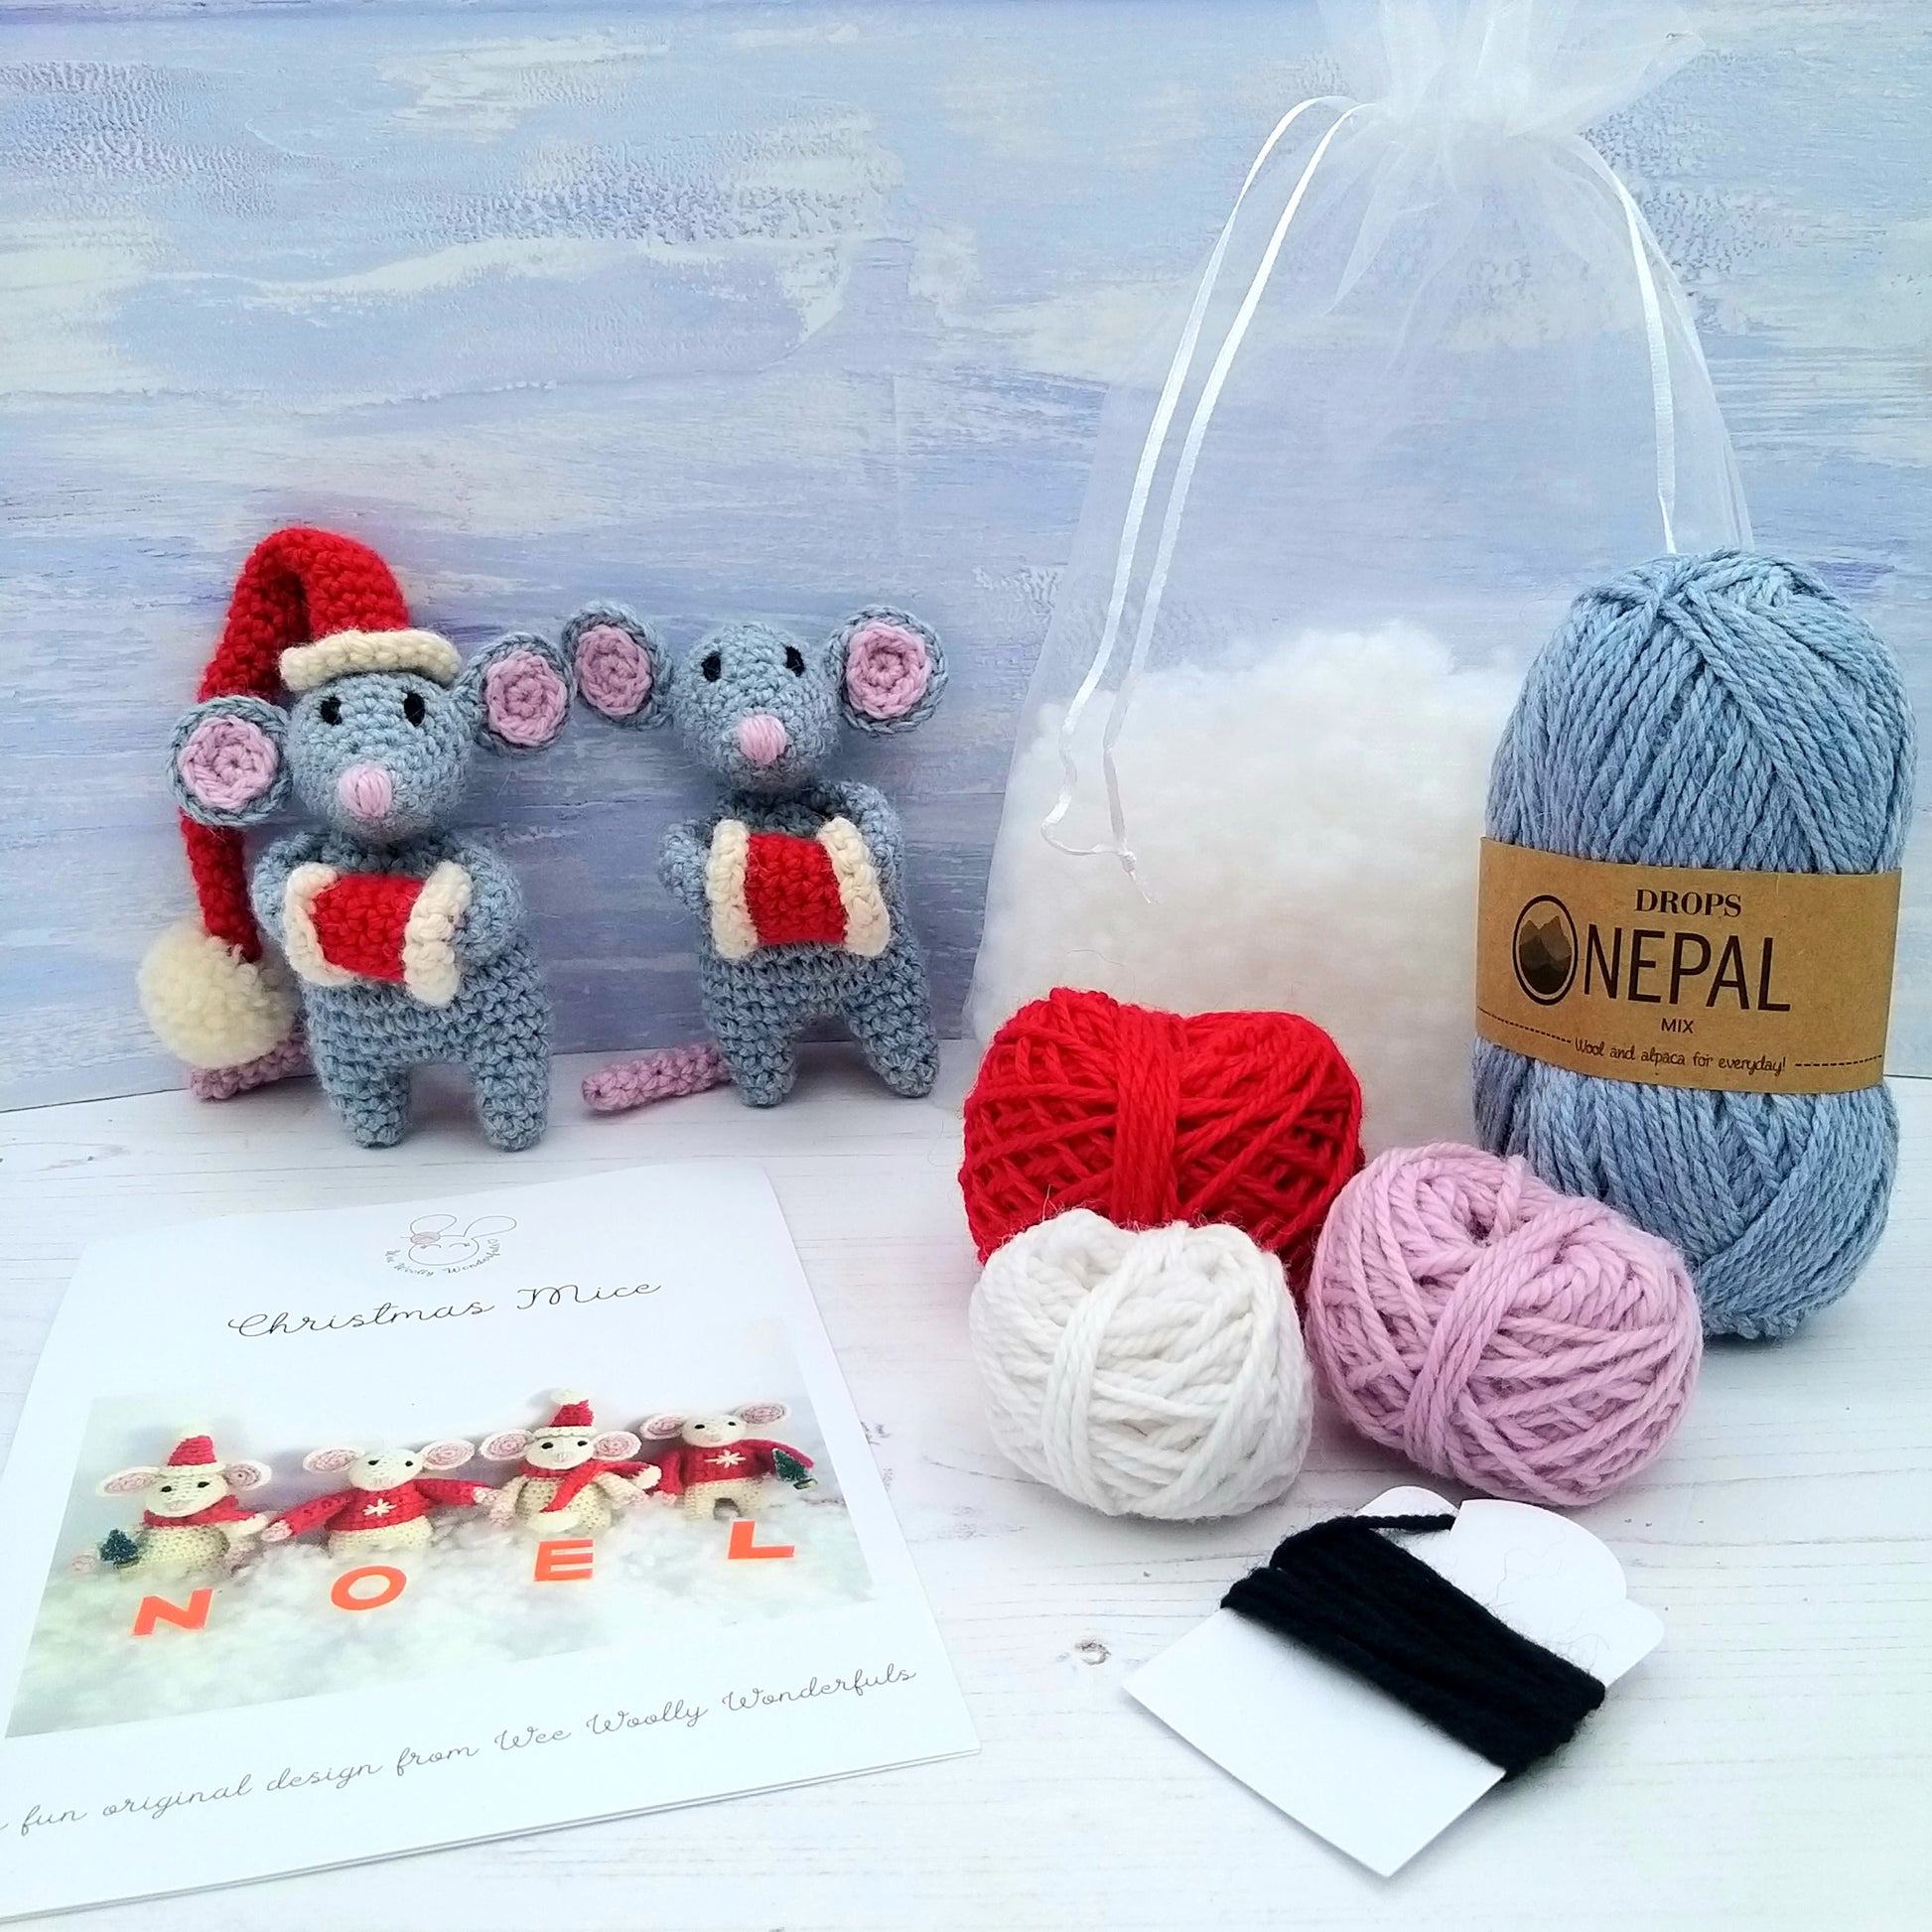 Kit contents - wool, pattern, stuffing and cotton